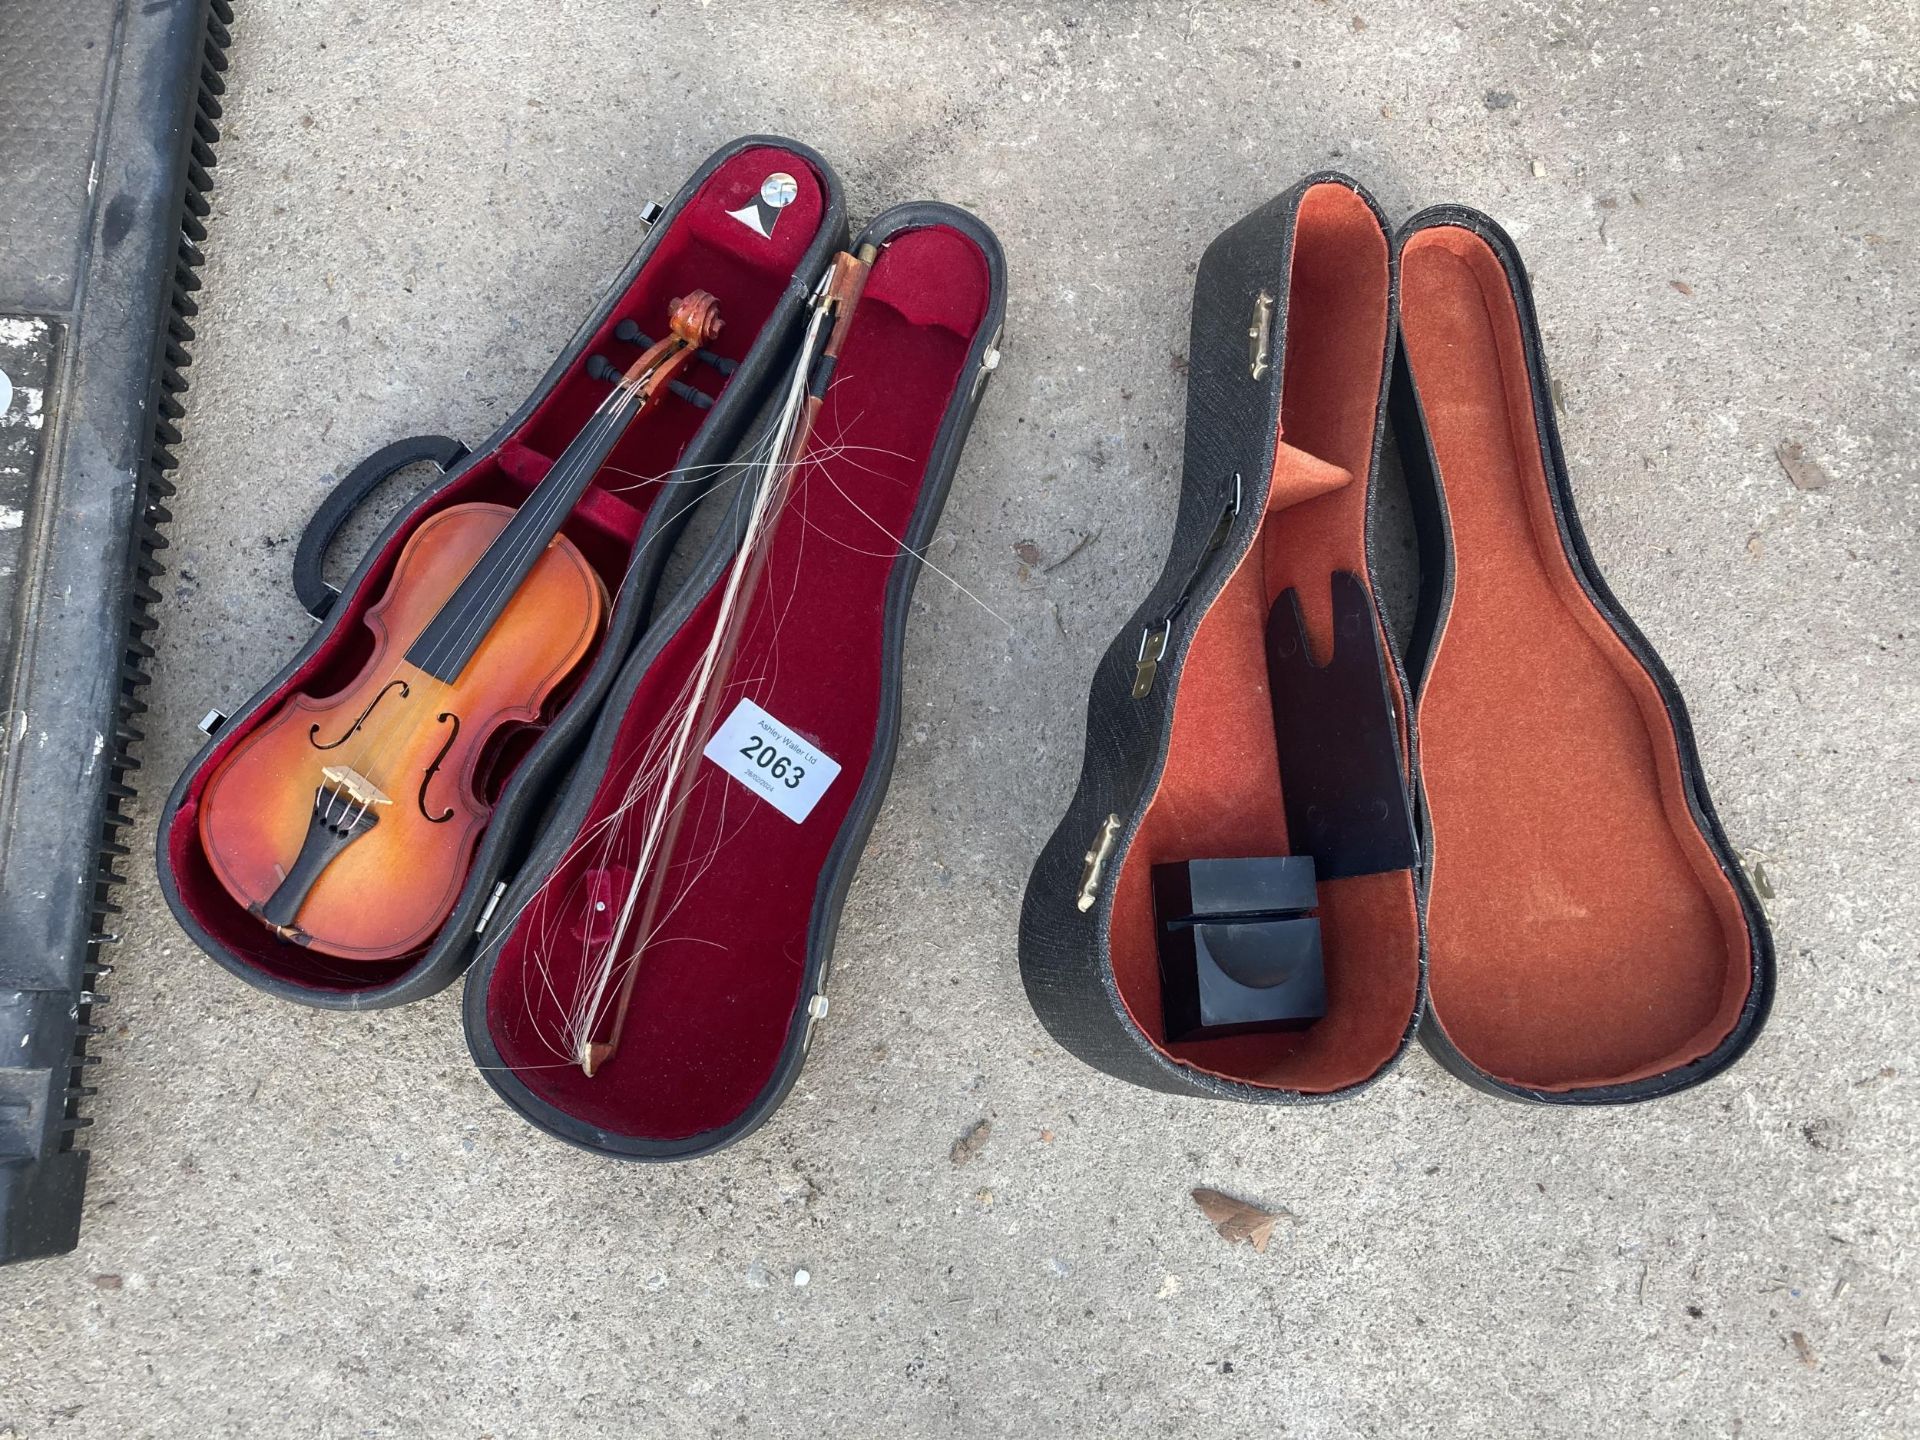 A MINITURE VIOLIN WITH CARRY CASE AND A CARRY CASE FOR A MINIATURE GUITAR